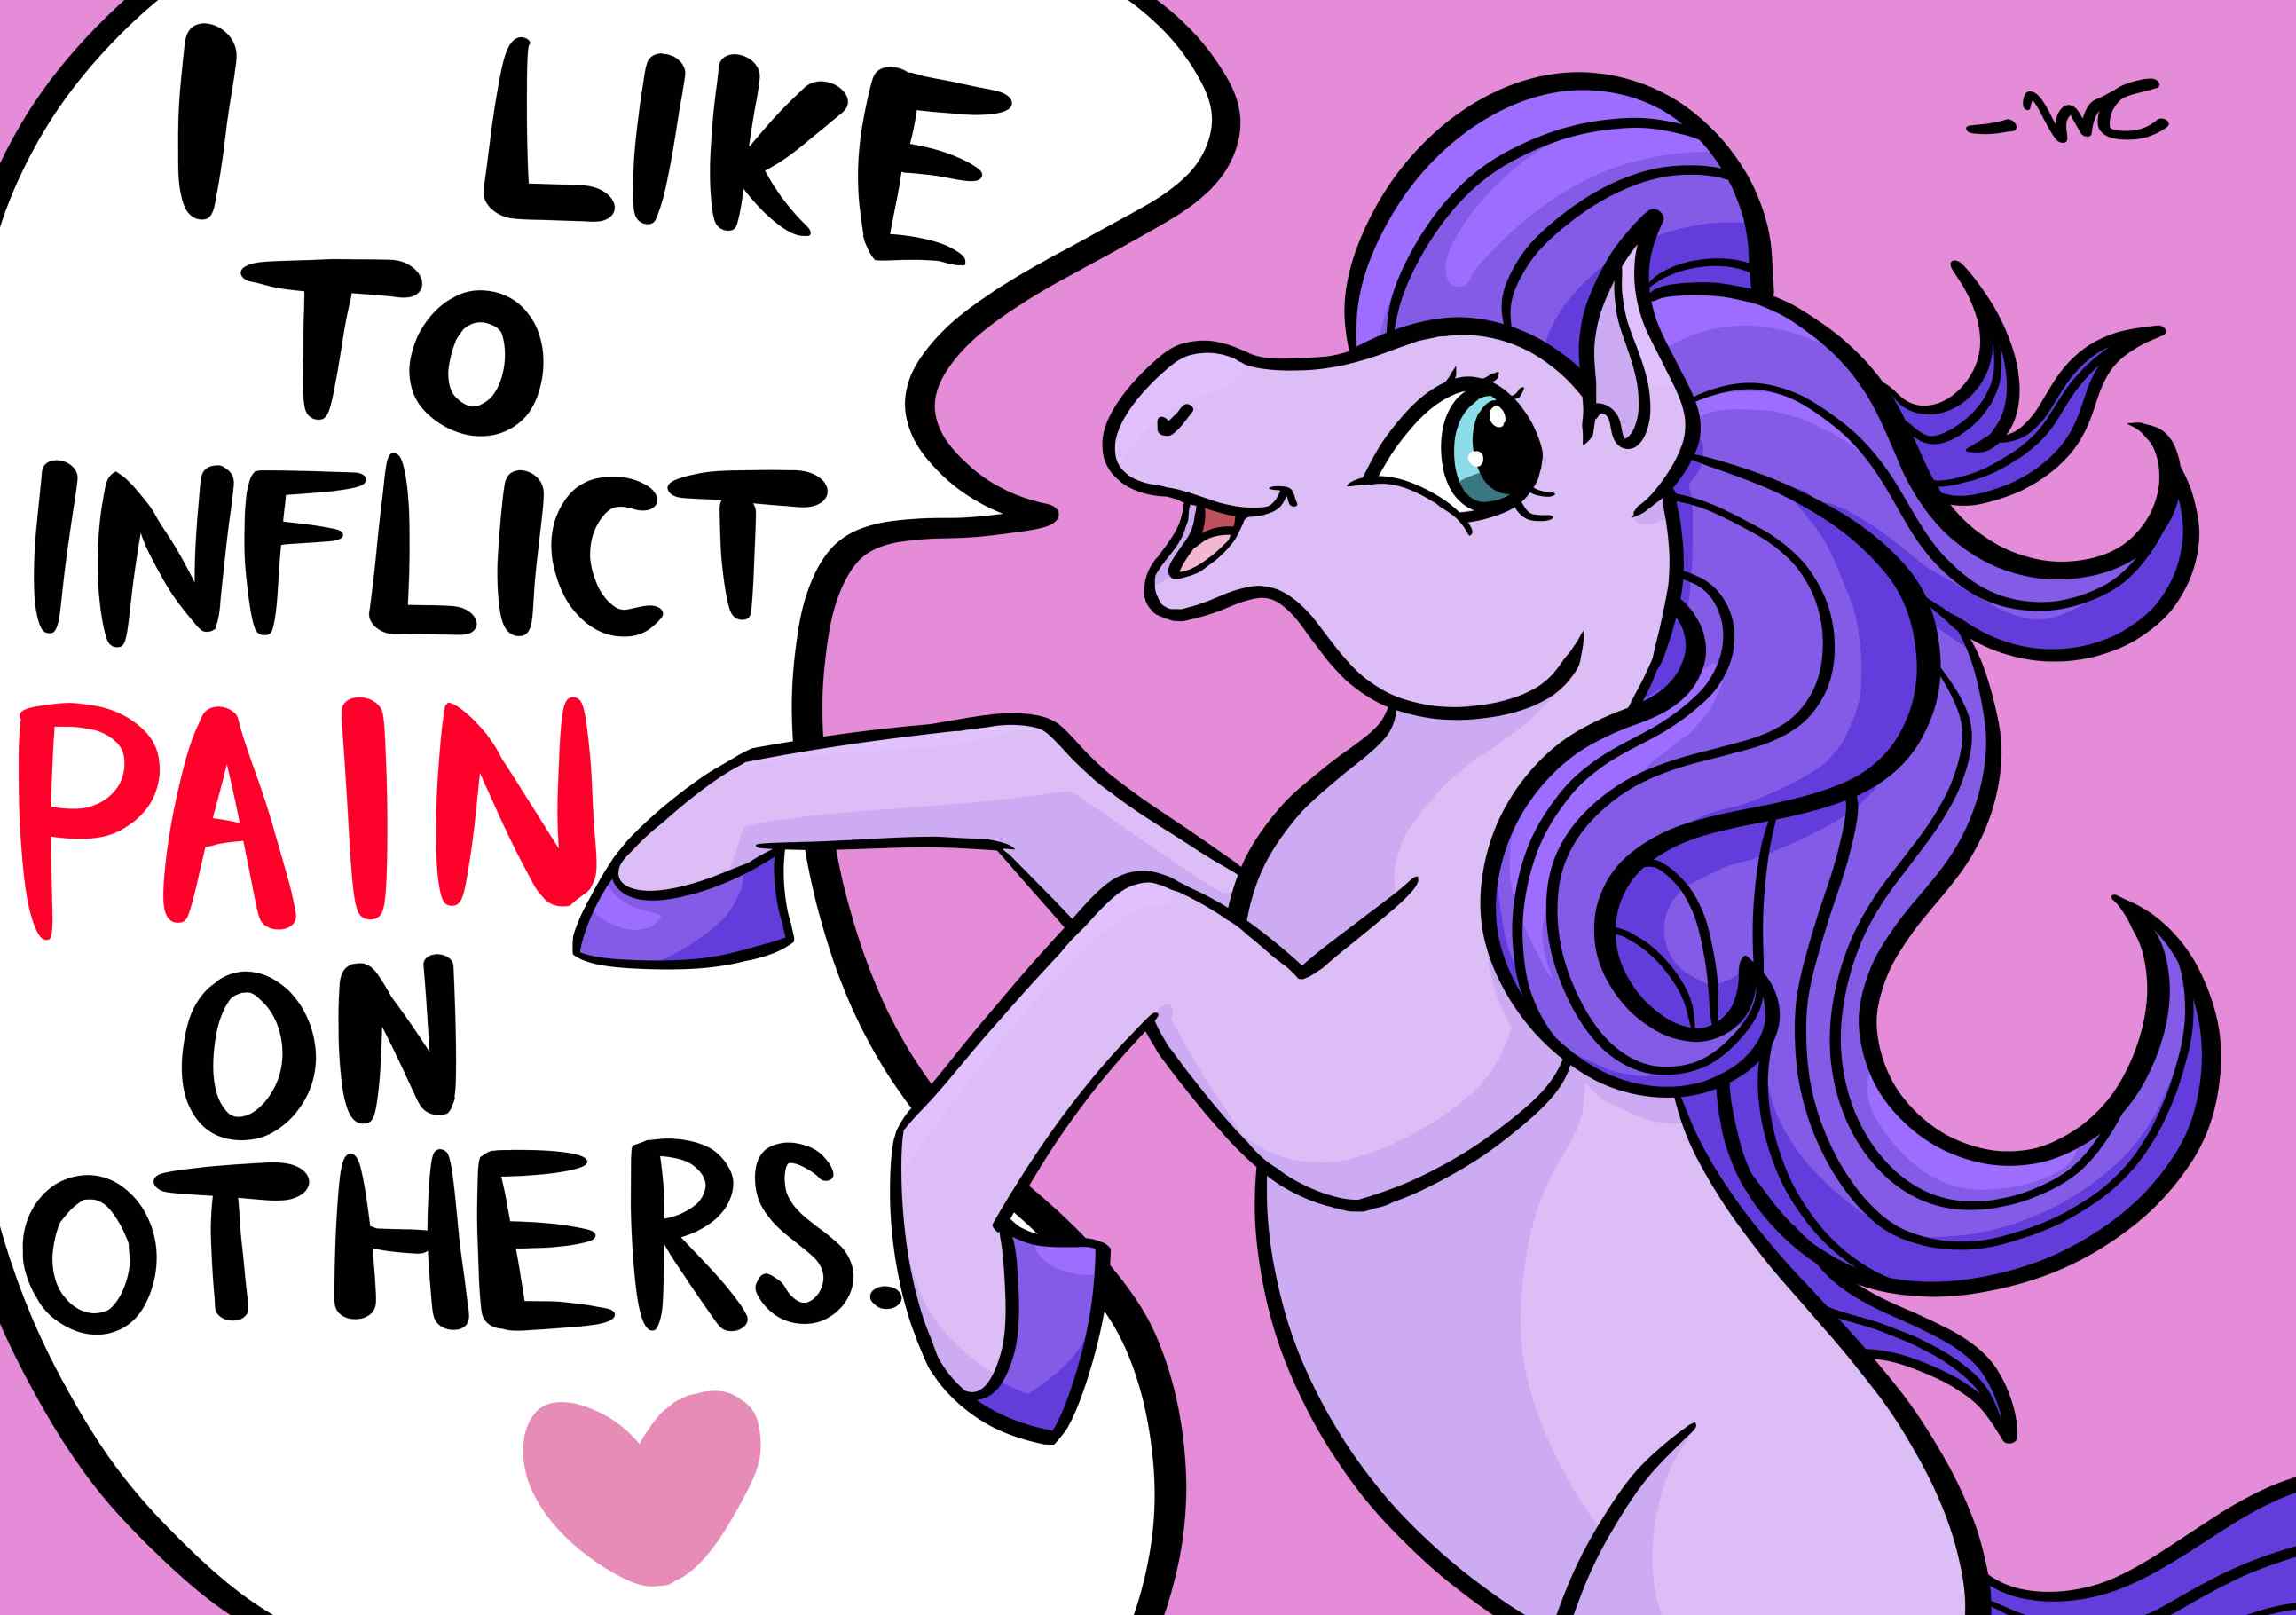 A cute, purple cartoon pony exclaiming, 'I LIKE TO INFLICT PAIN ON OTHERS.'